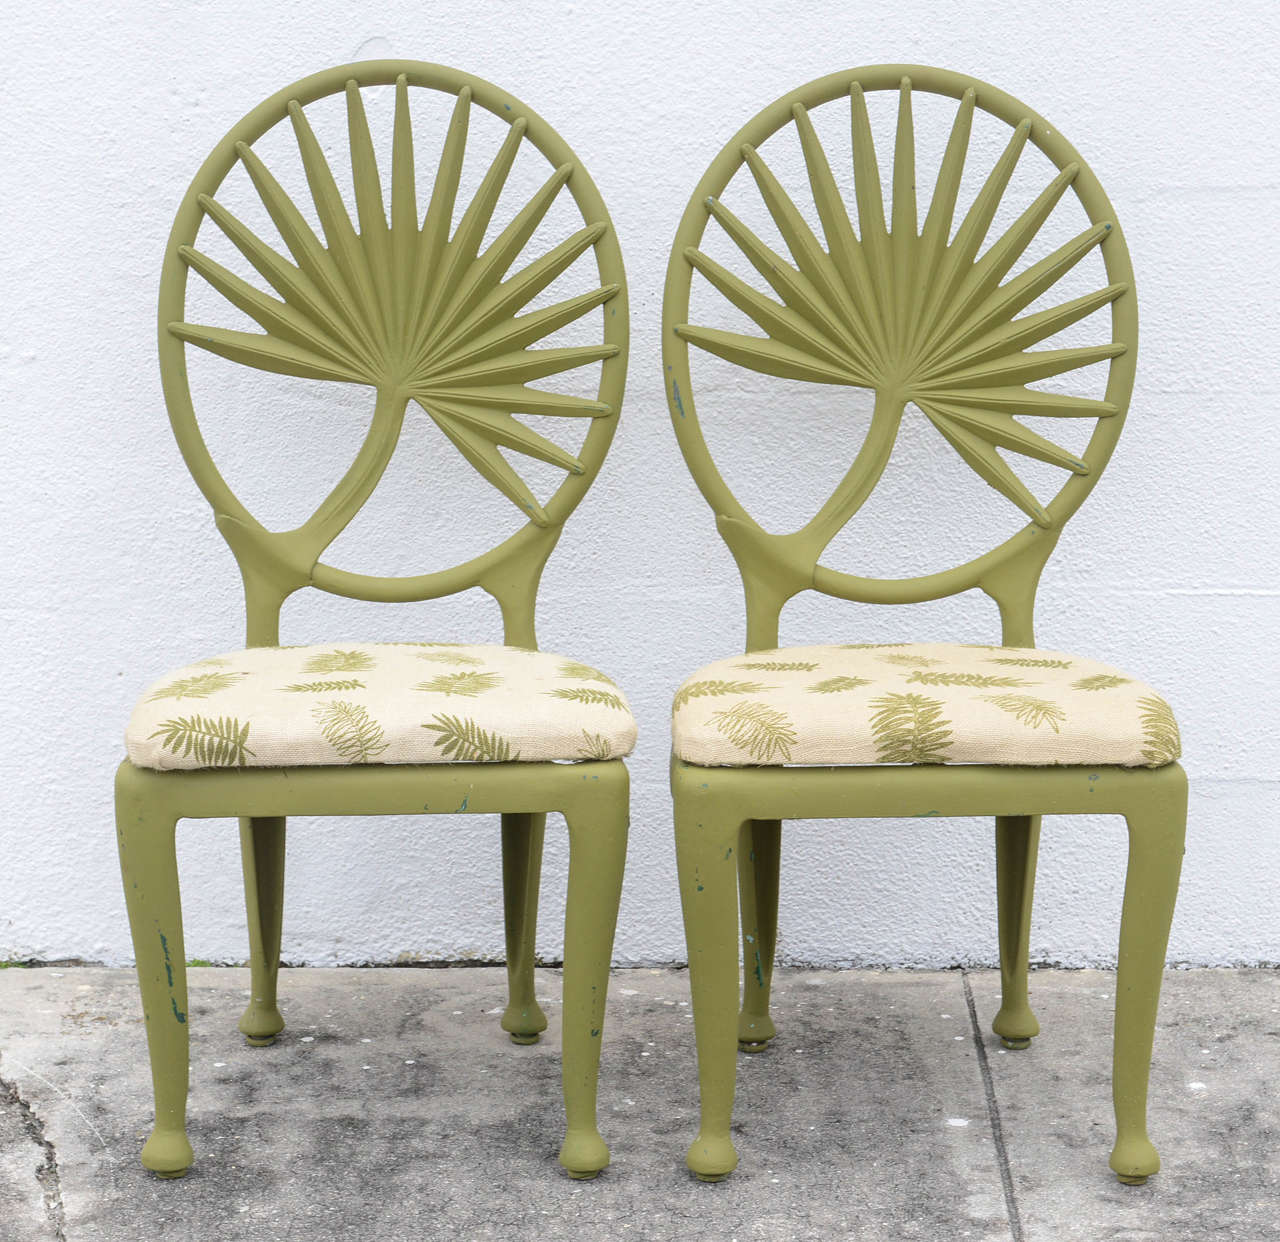 Unusual set of six painted aluminum chairs with palm frond motif. Very decorative.